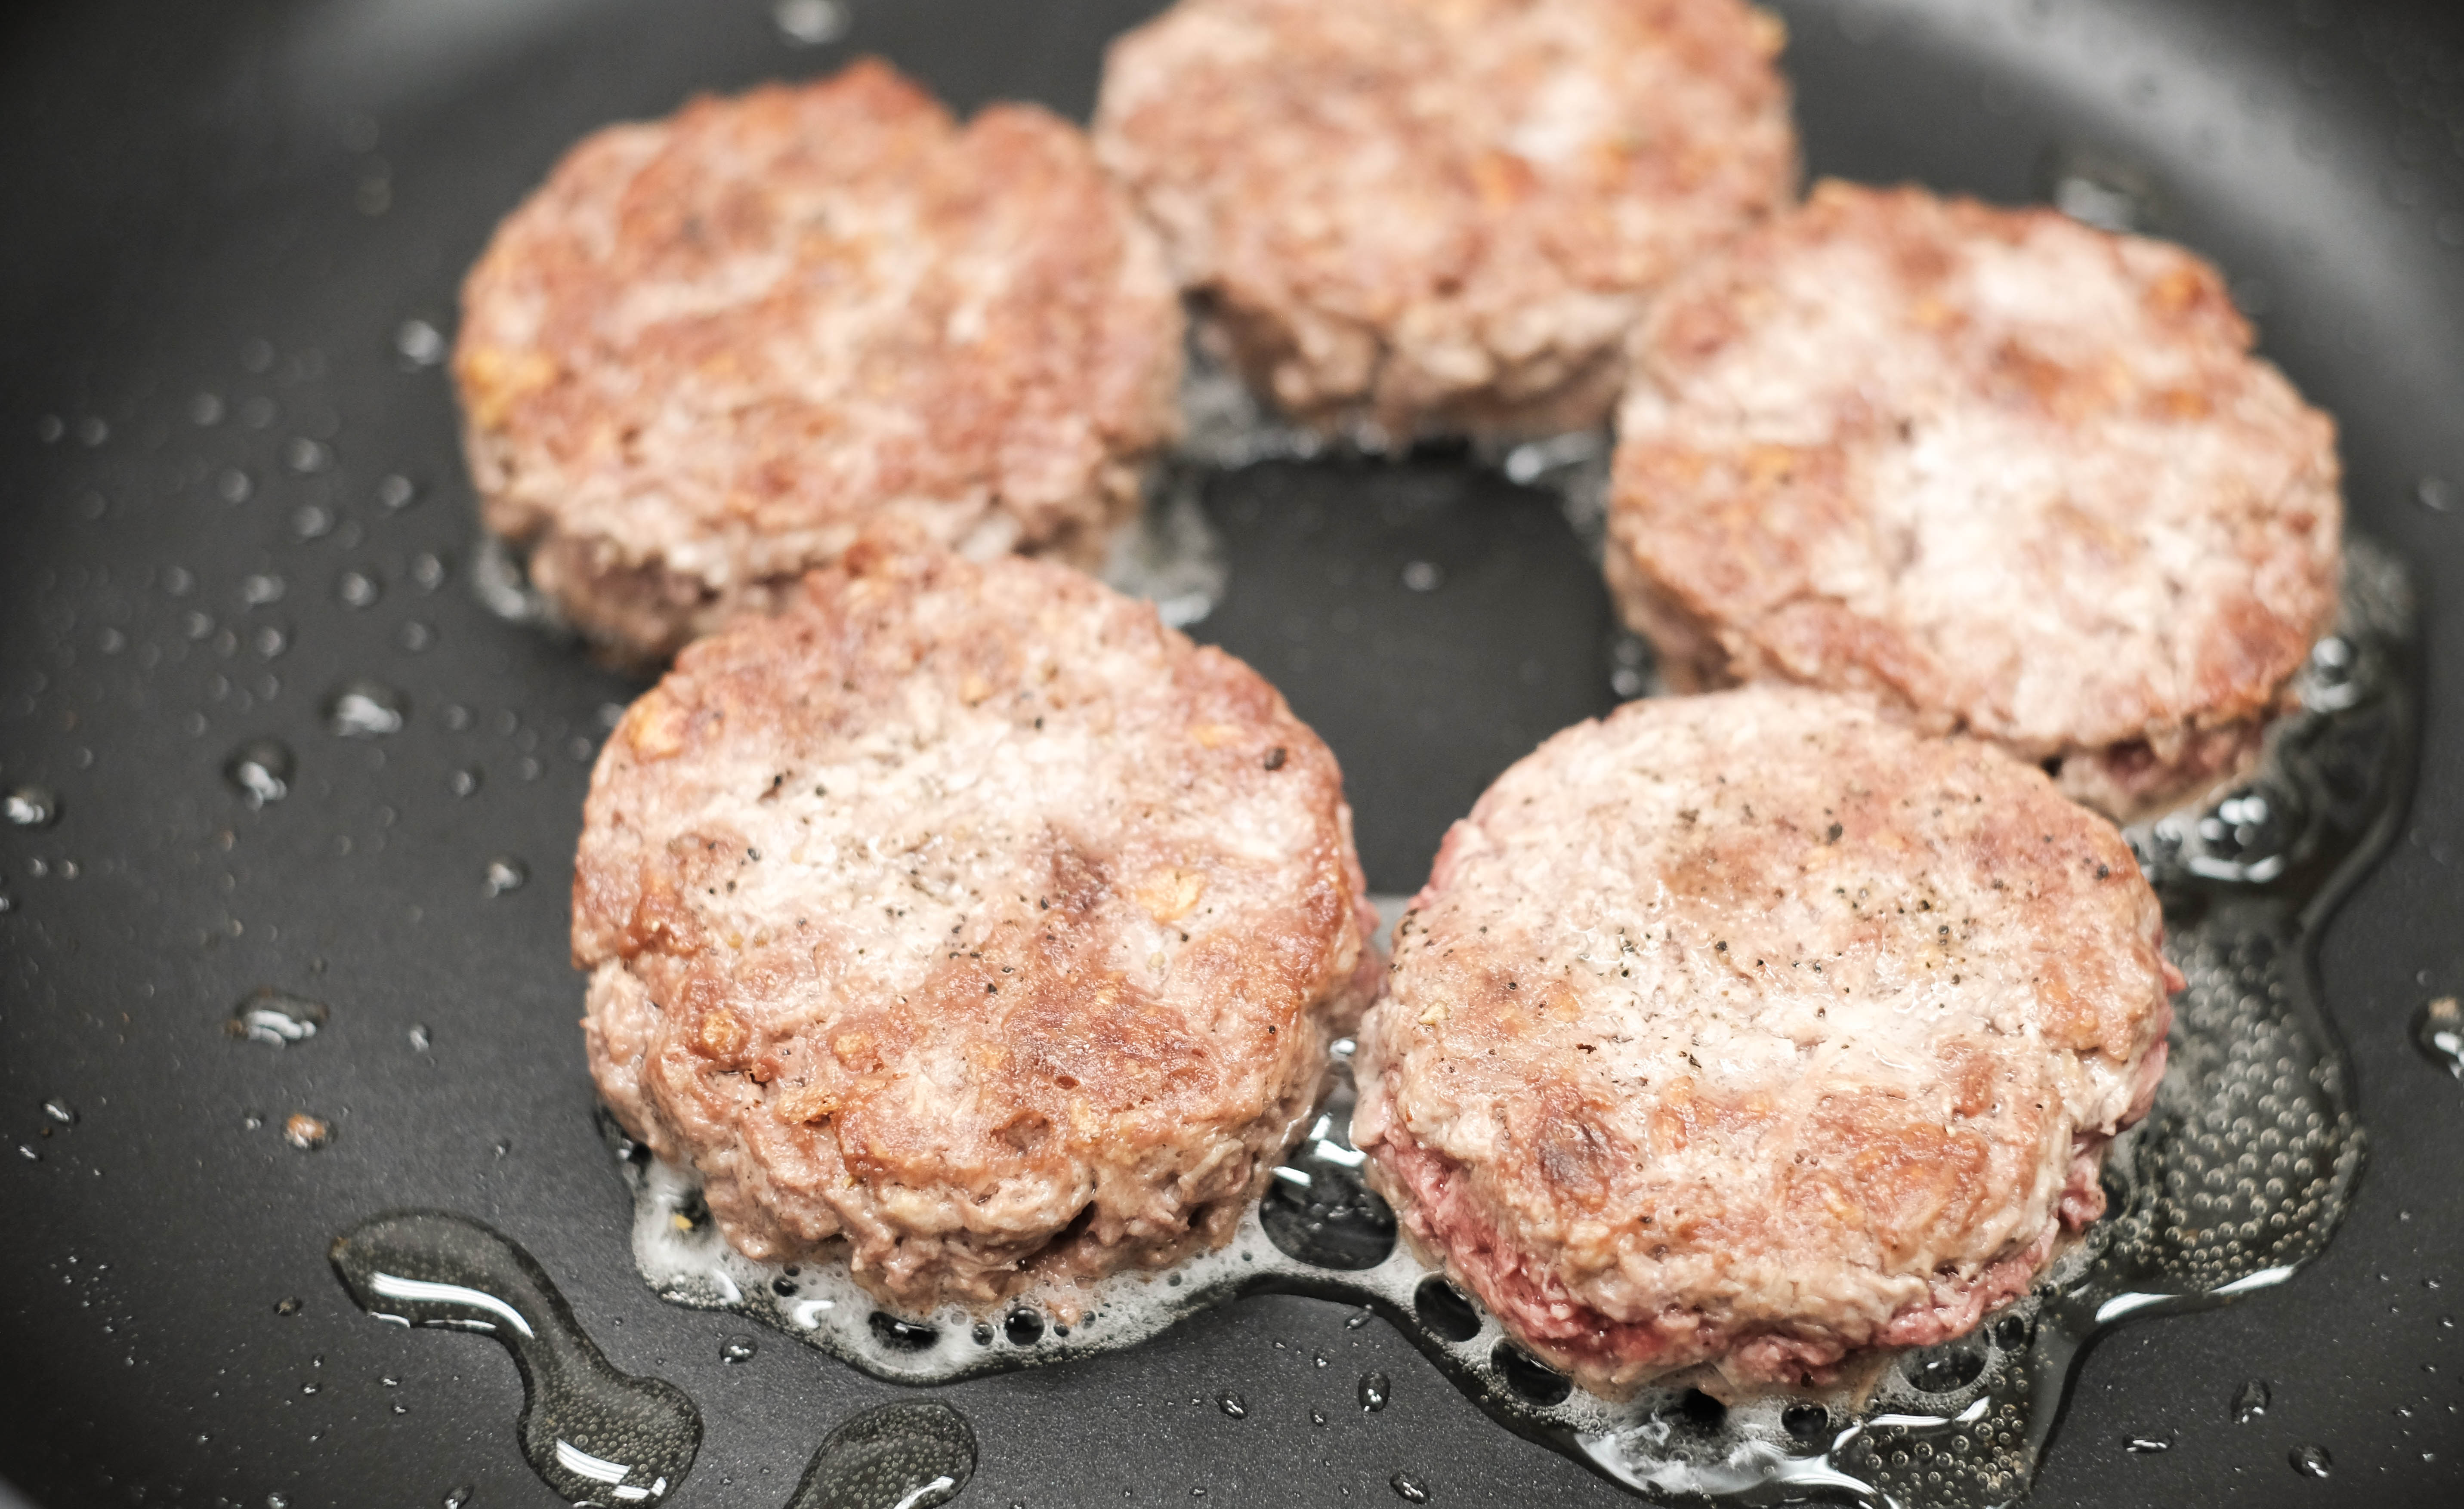 Coconut oil in the burgers mimics the consistency of beef fat. 